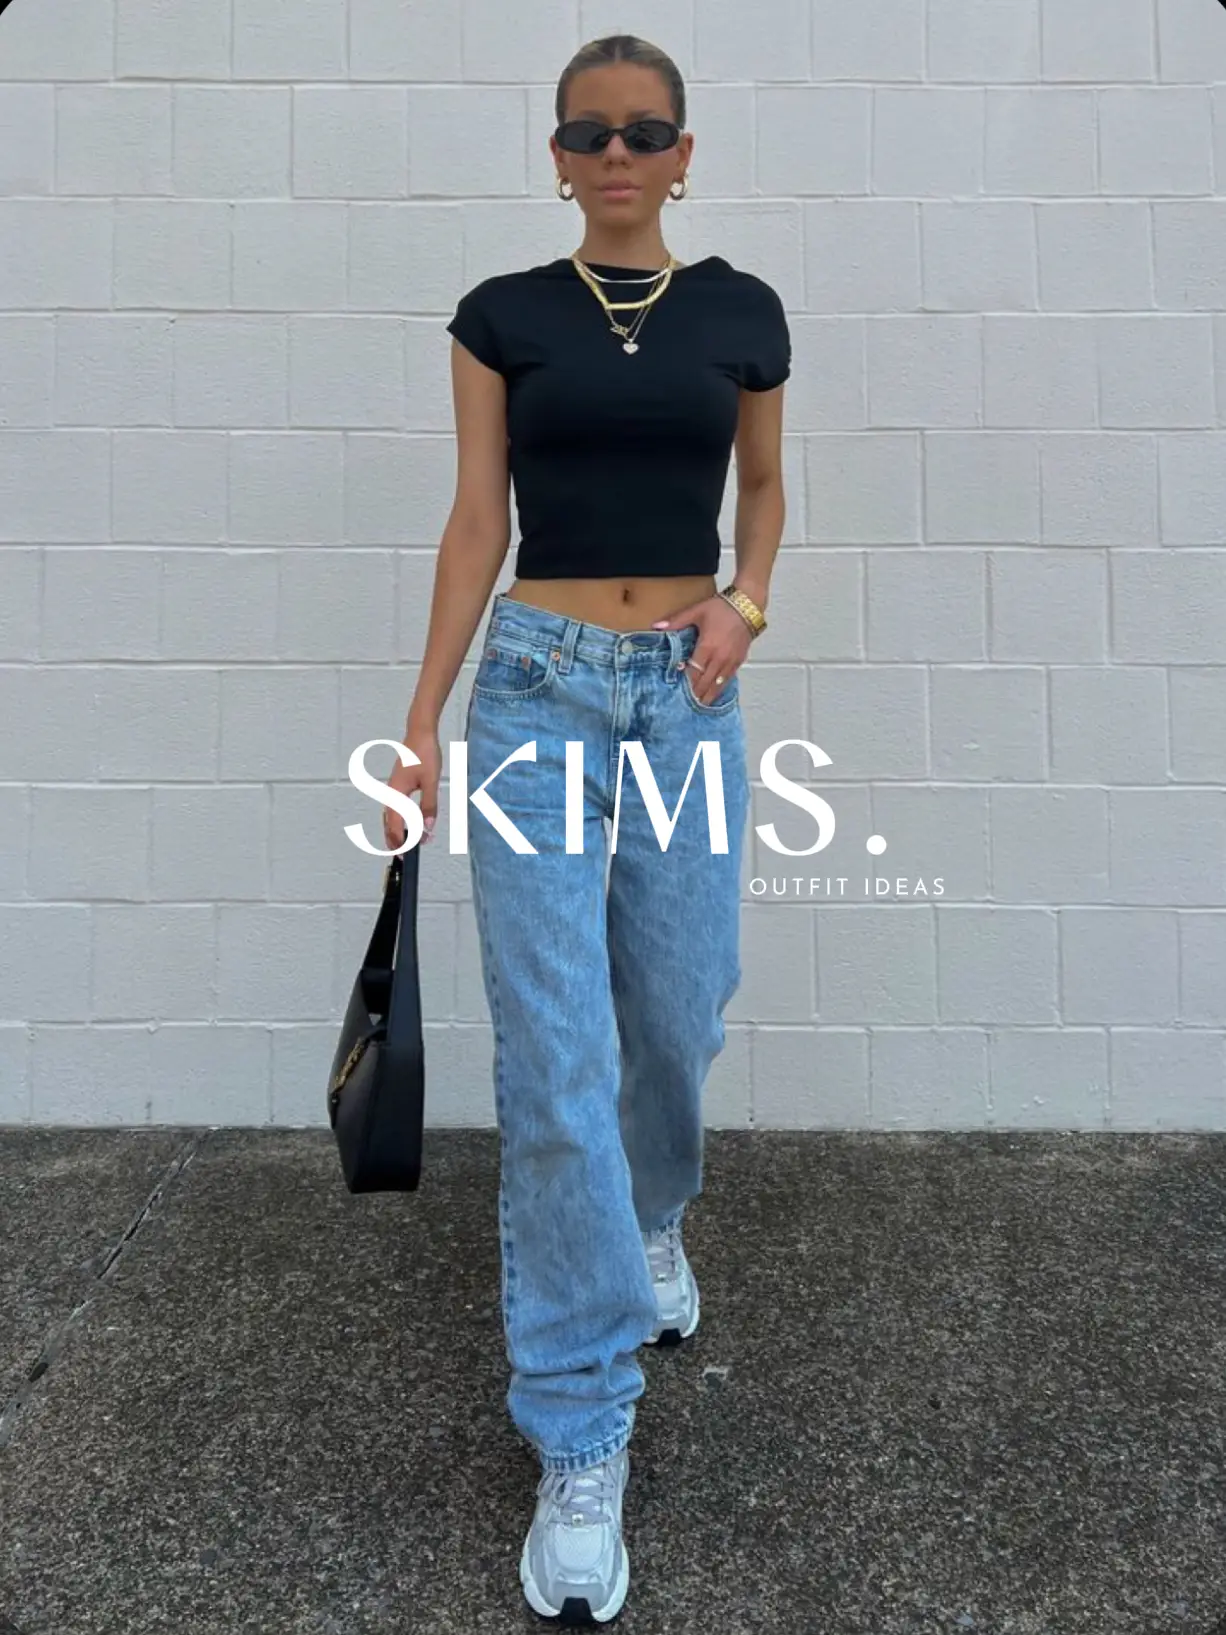 SKIMS Outfit Inspo, Gallery posted by Rylee Nicole